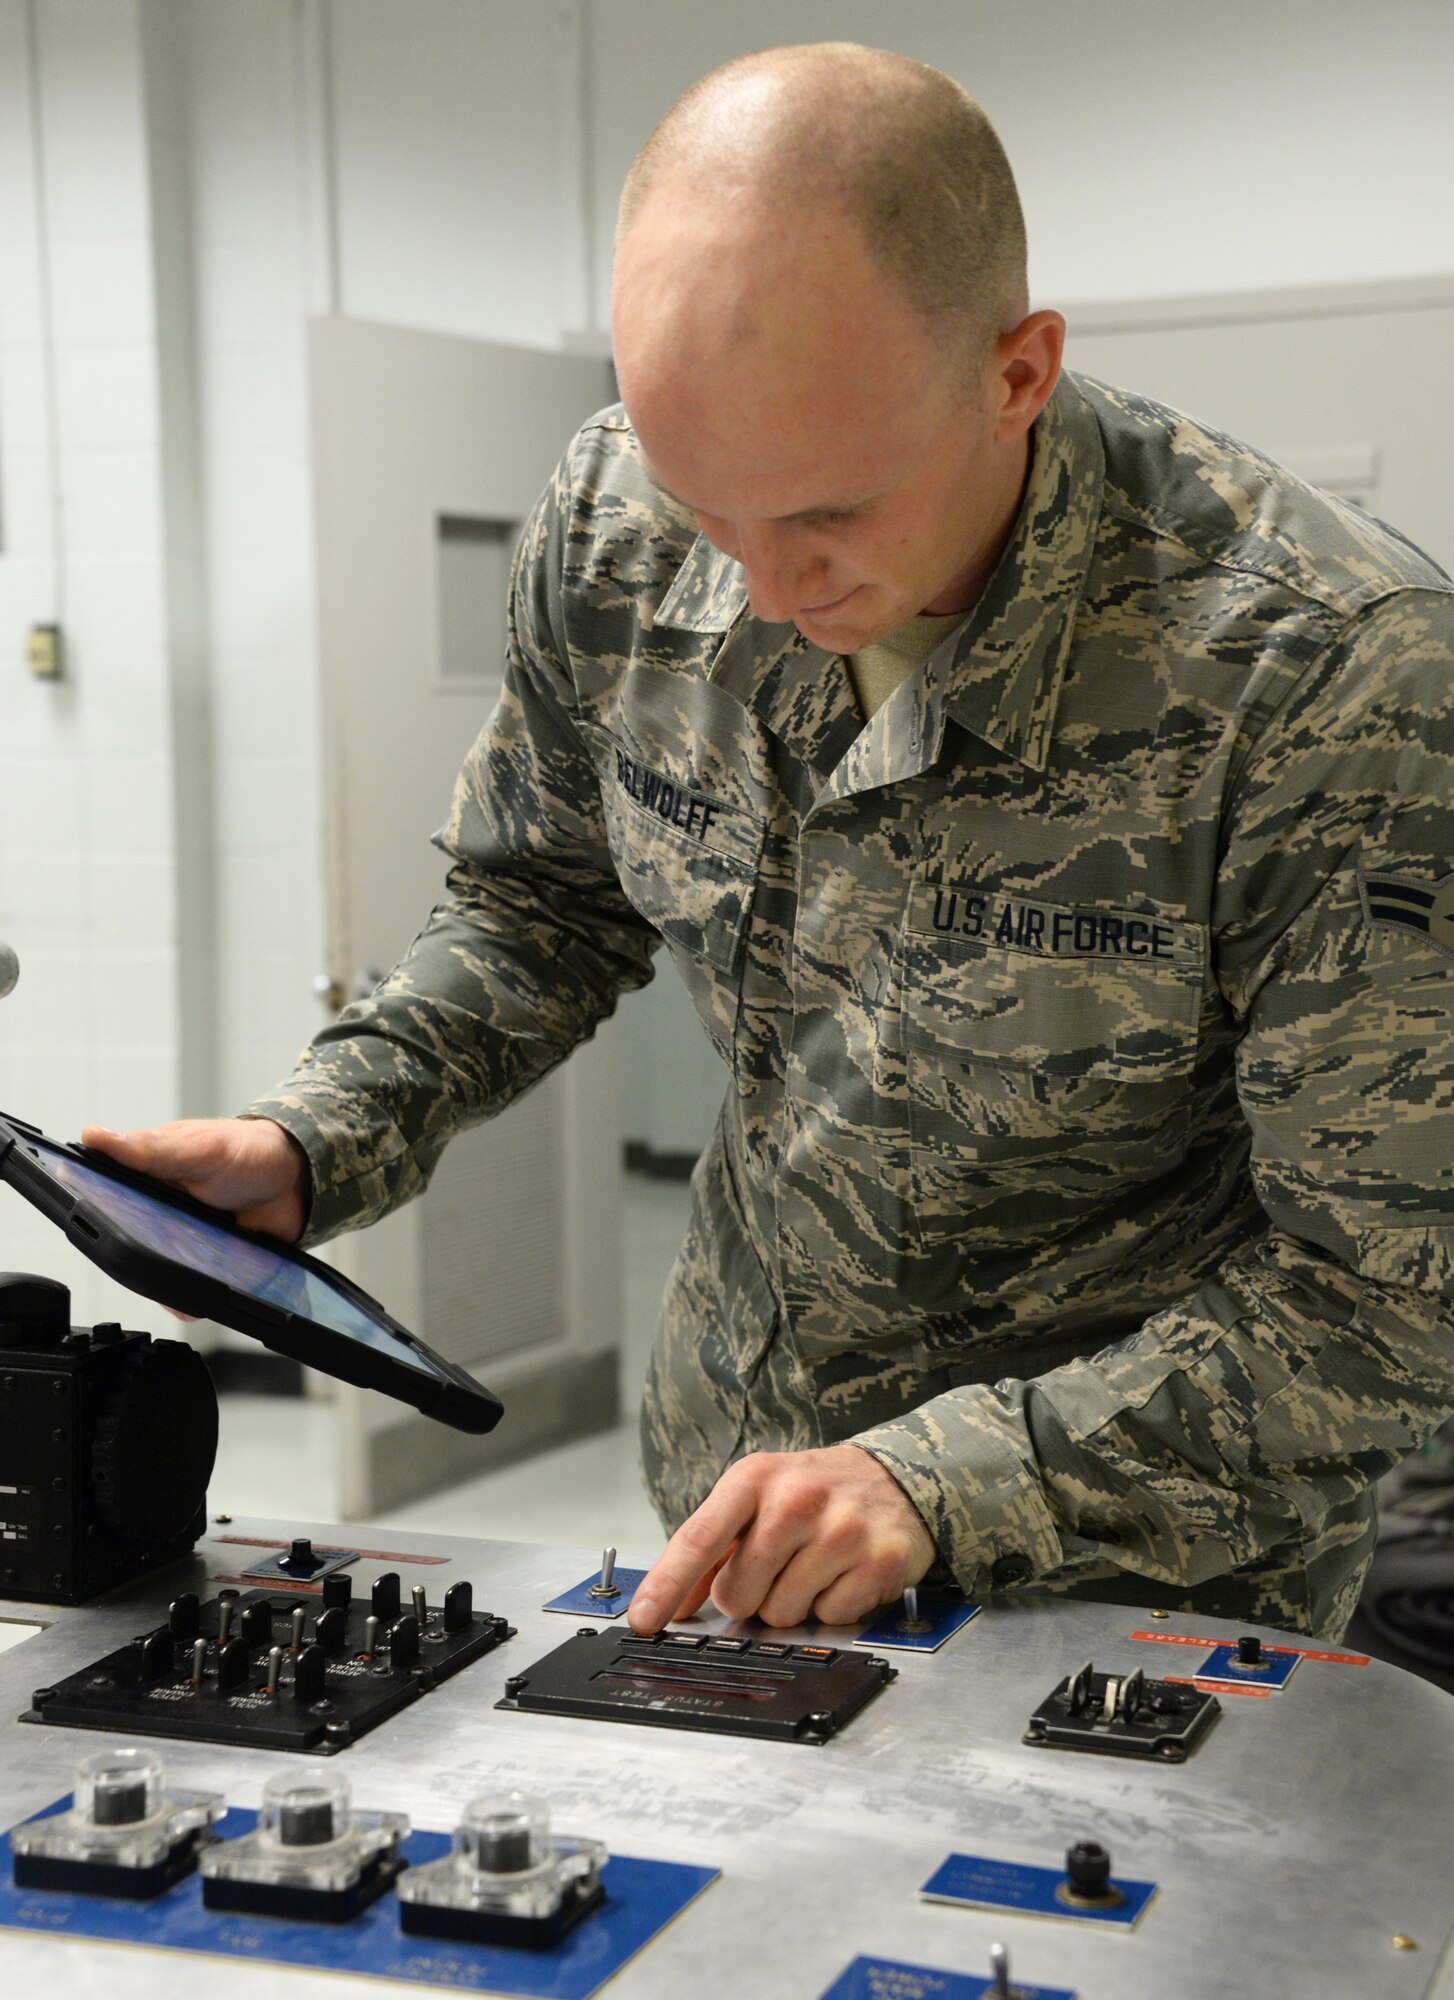 Airman 1st Class Mitchell Belwoff, 365th Training Squadron instrument and flight controls apprentice course student, works on an autopilot trainer at Sheppard Air Force Base, Texas, Oct. 2, 2019.